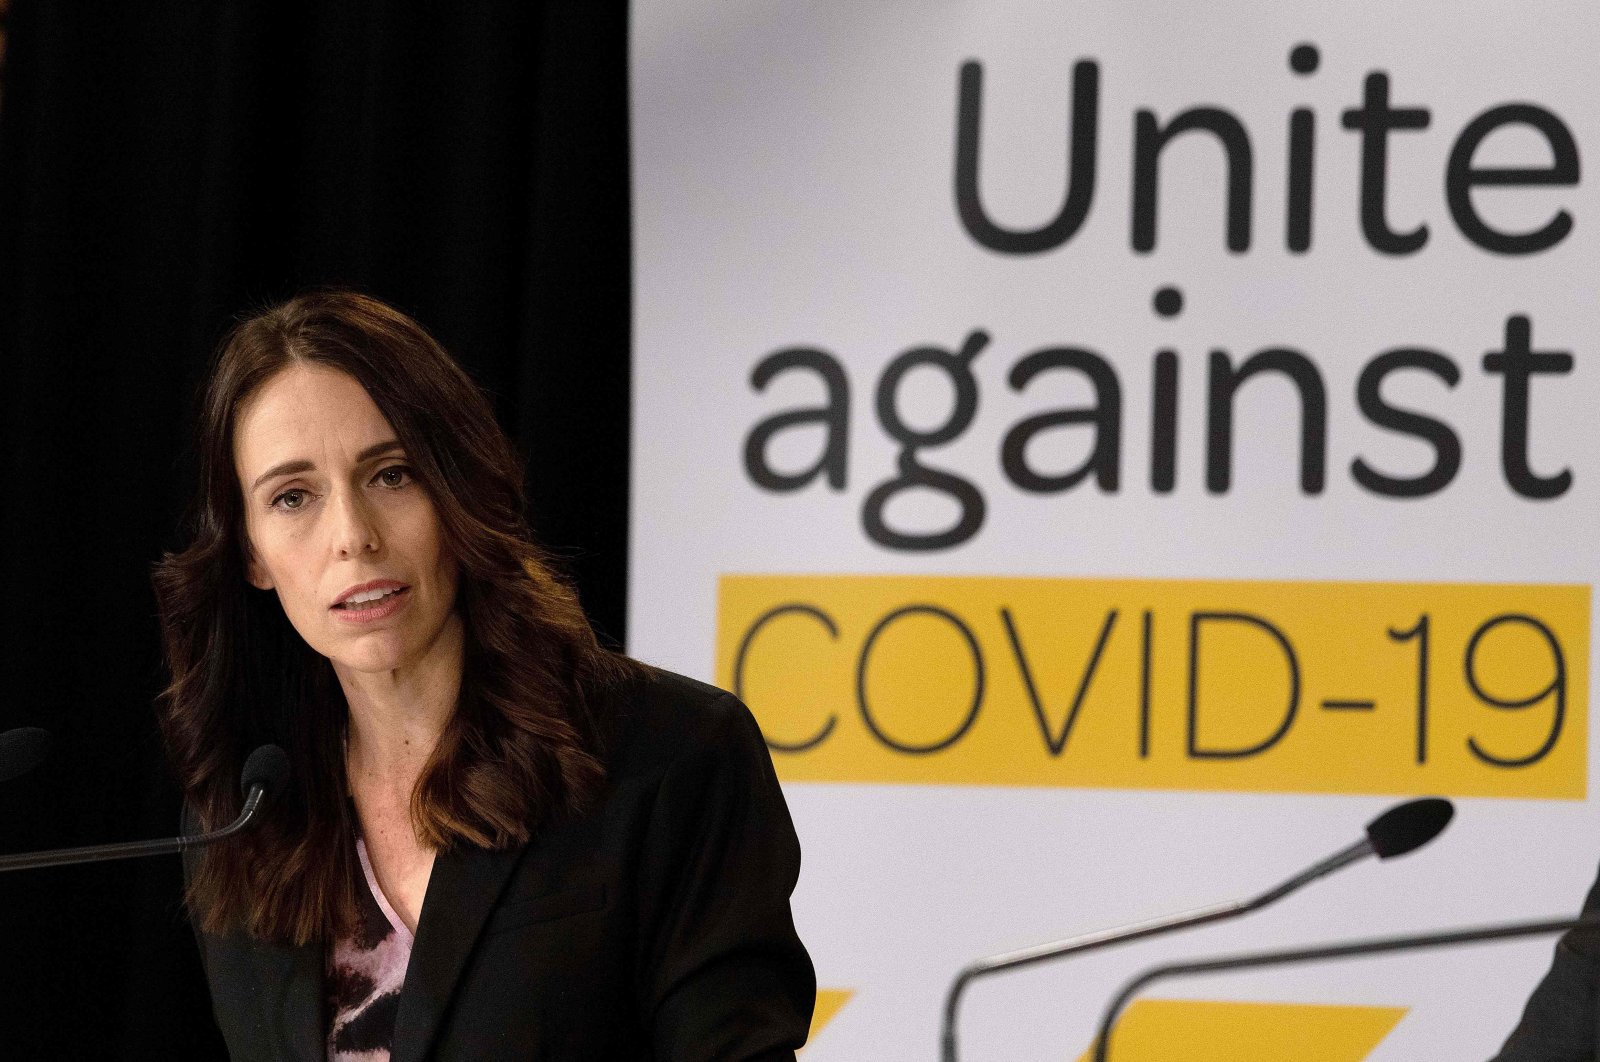 New Zealand's Prime Minister Jacinda Ardern speaks to the media during a press conference one day before the country goes on lockdown to stop any progress of the COVID-19 coronavirus, at Parliament in Wellington on March 24, 2020. (AFP Photo)